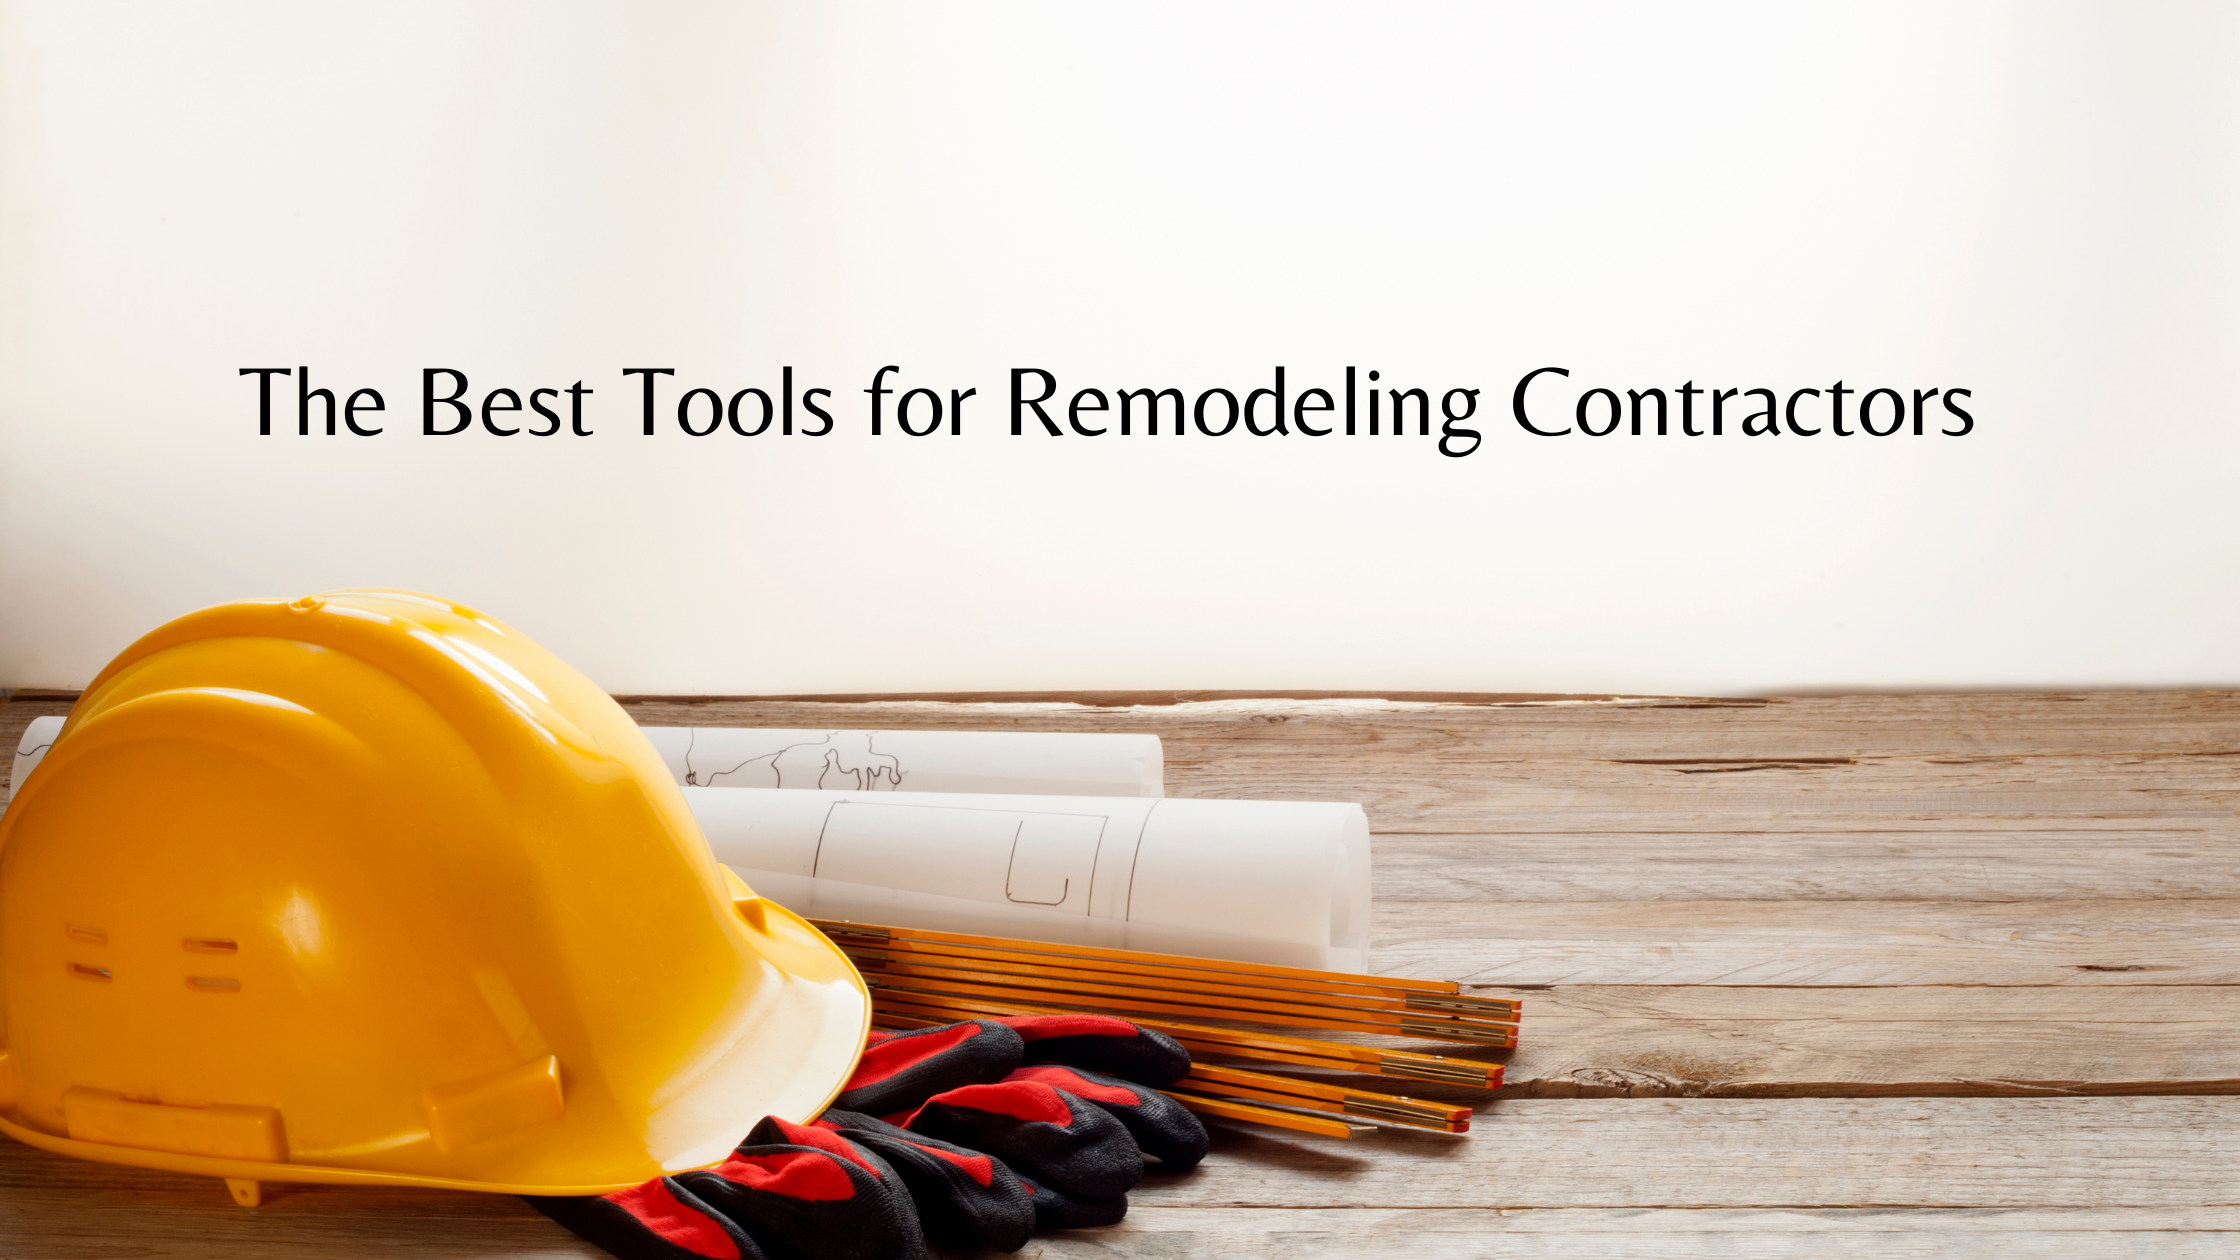 https://handymanconnection.com/wp-content/uploads/2021/05/The-Best-Tools-for-Remodeling-Contractors.png